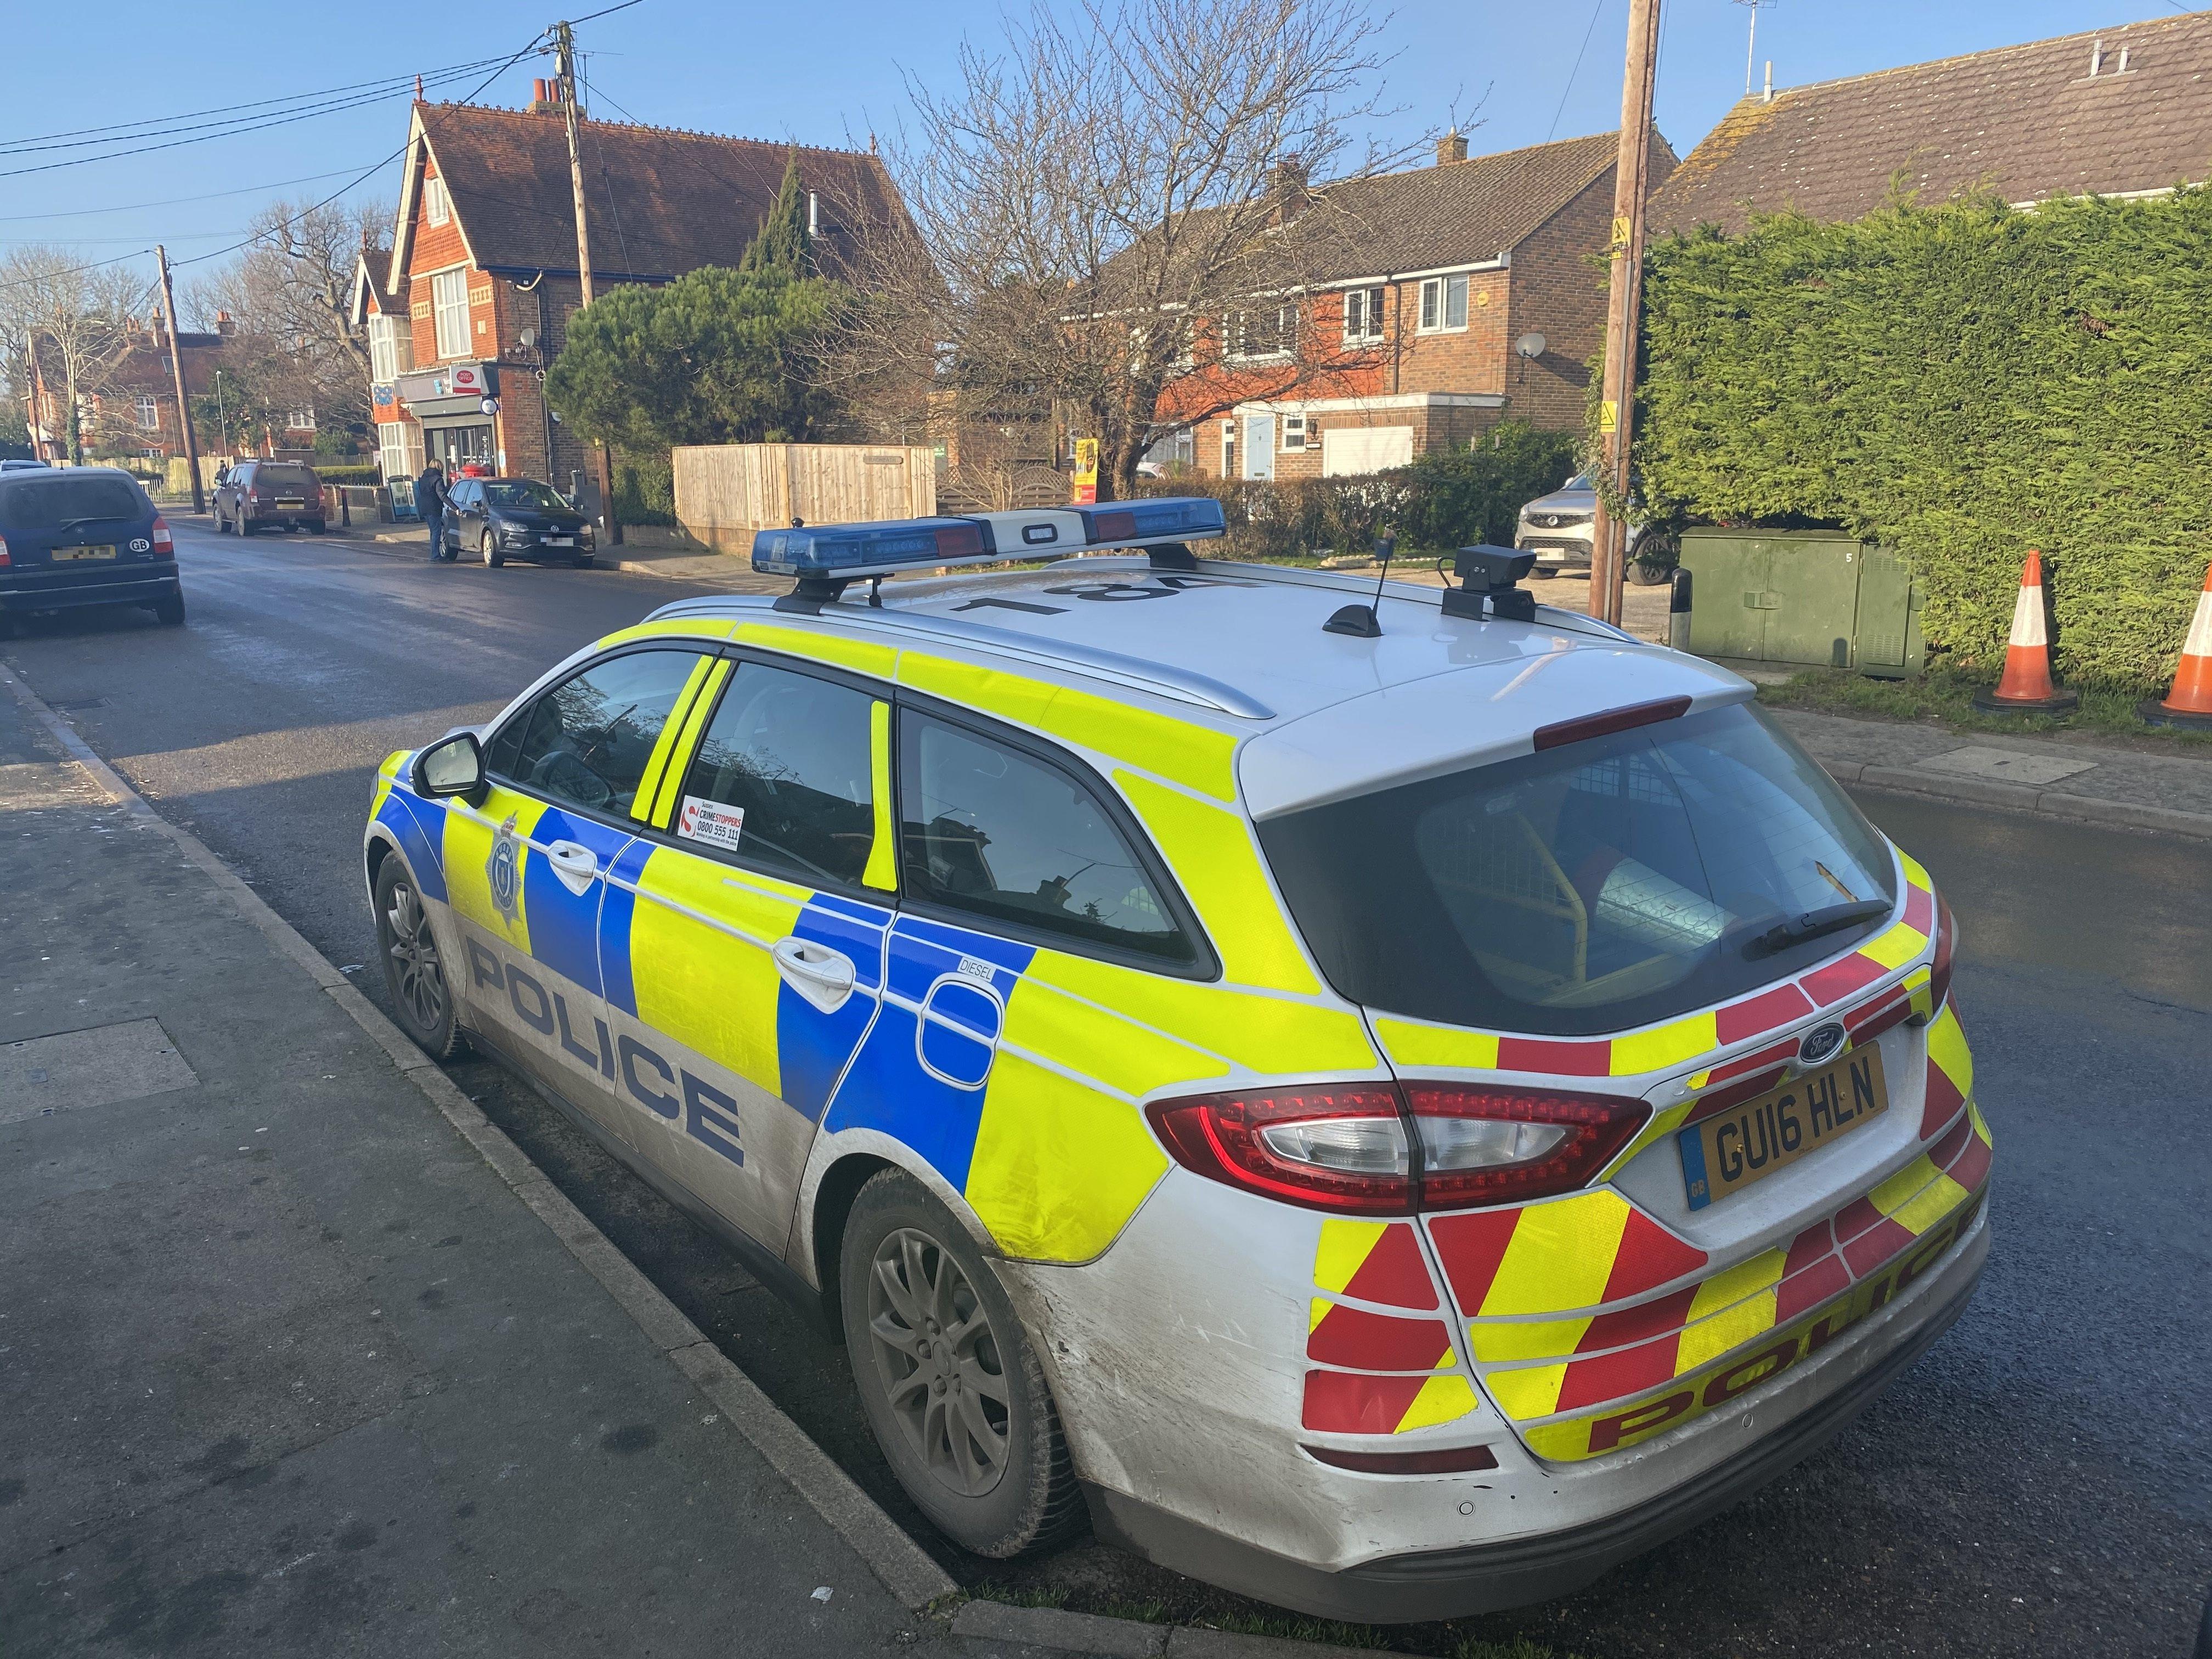 The police incident in Partridge Green